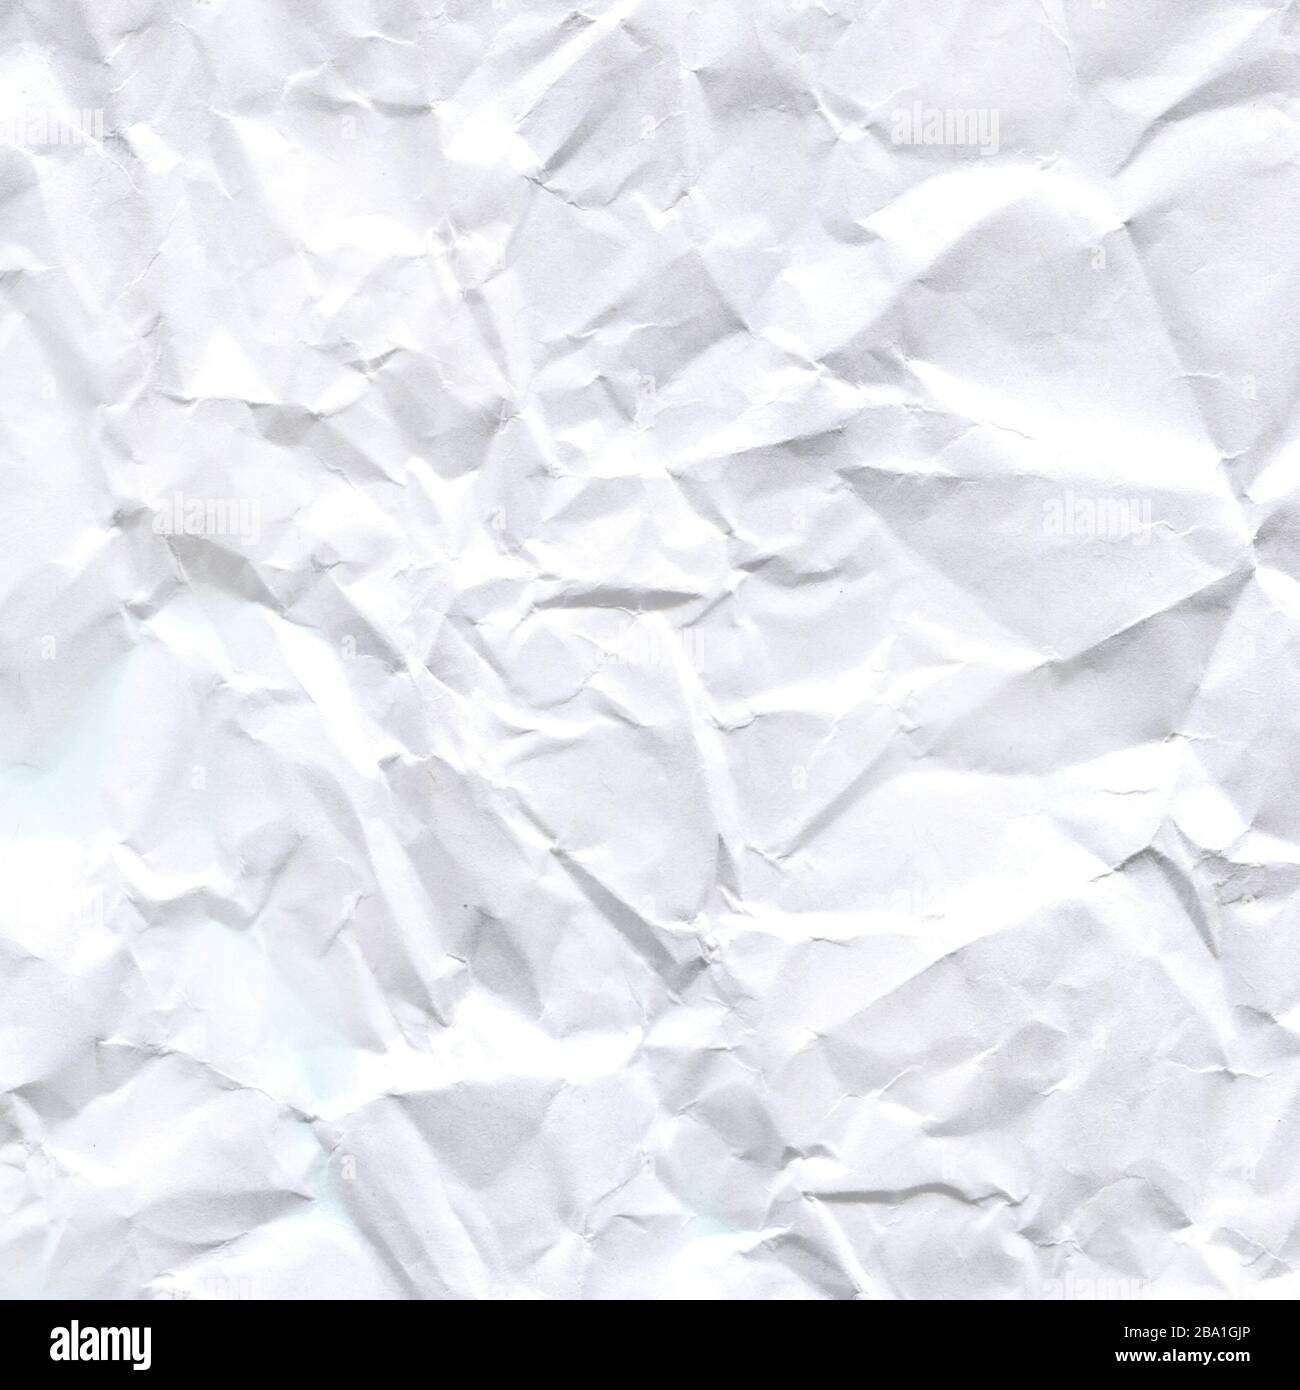 Crumpled white paper texture as a background image. Paper for